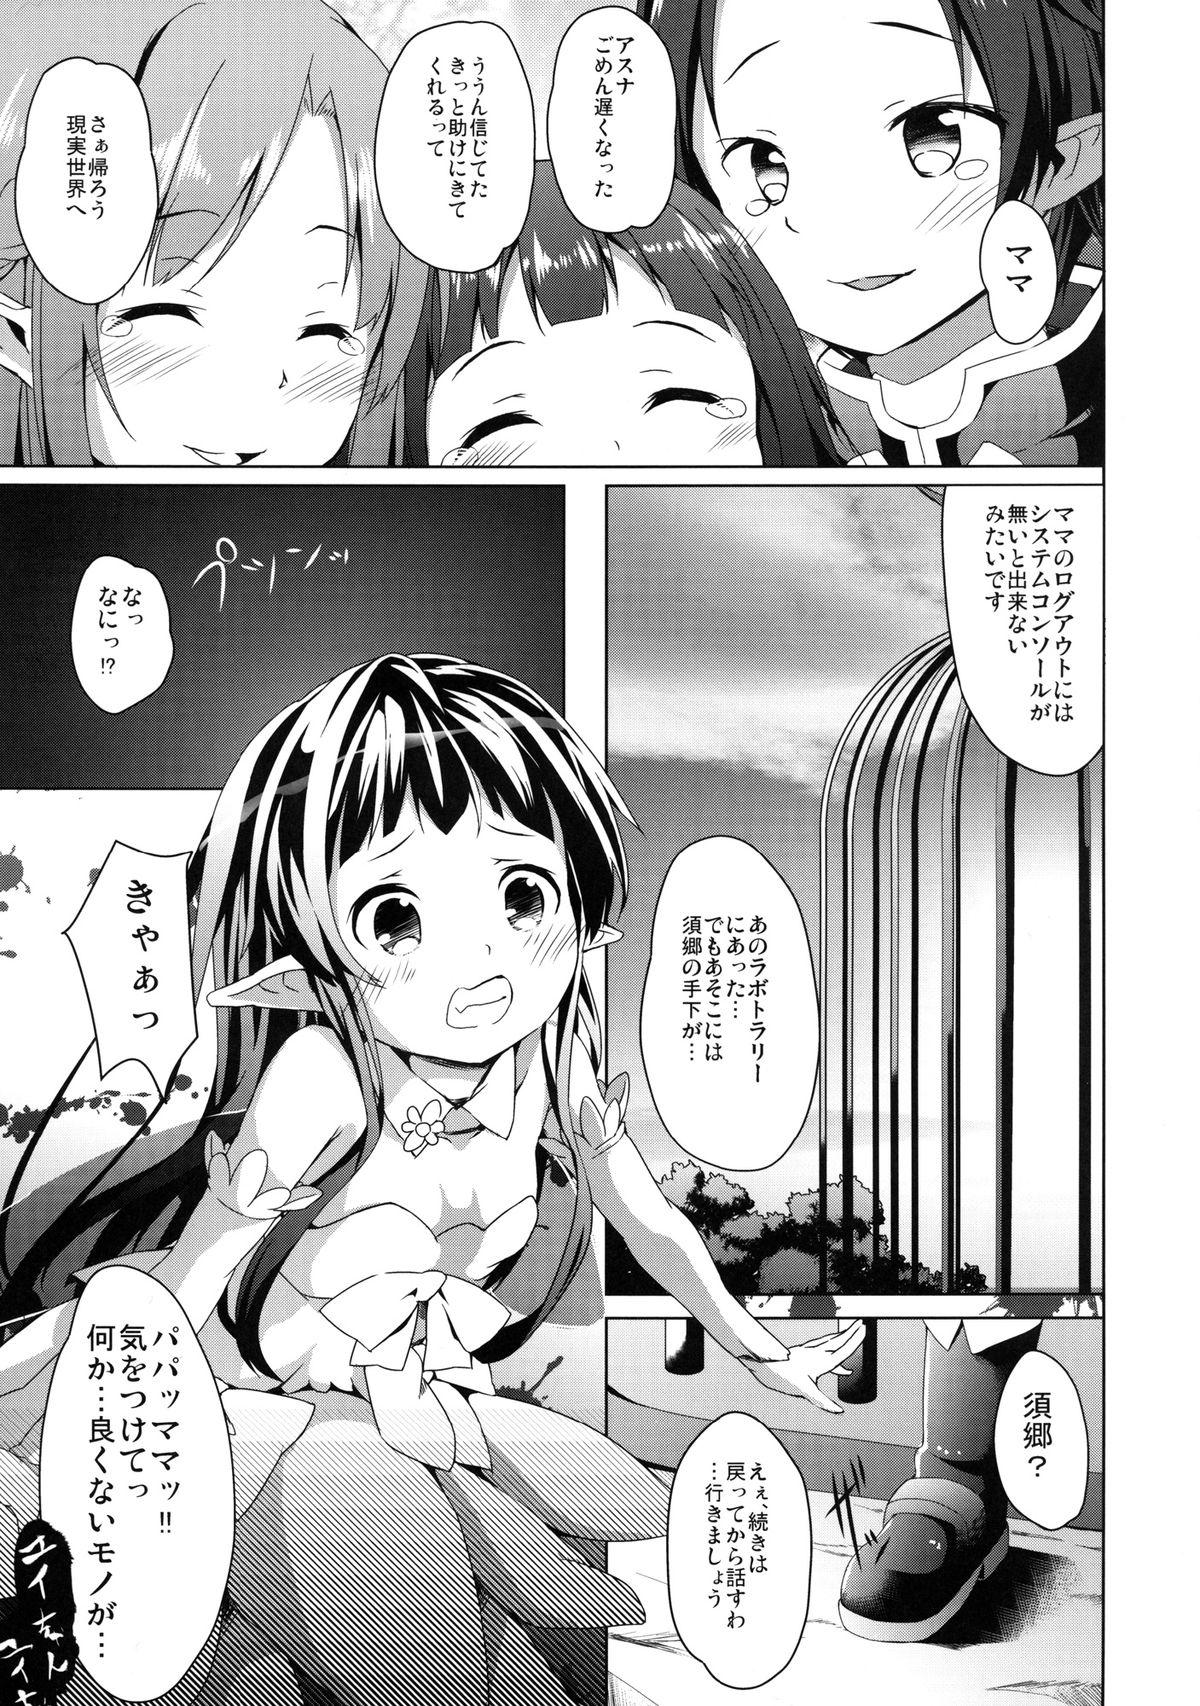 Tiny Titties Yui-chan BOKOO! - Sword art online Glamour Porn - Page 3